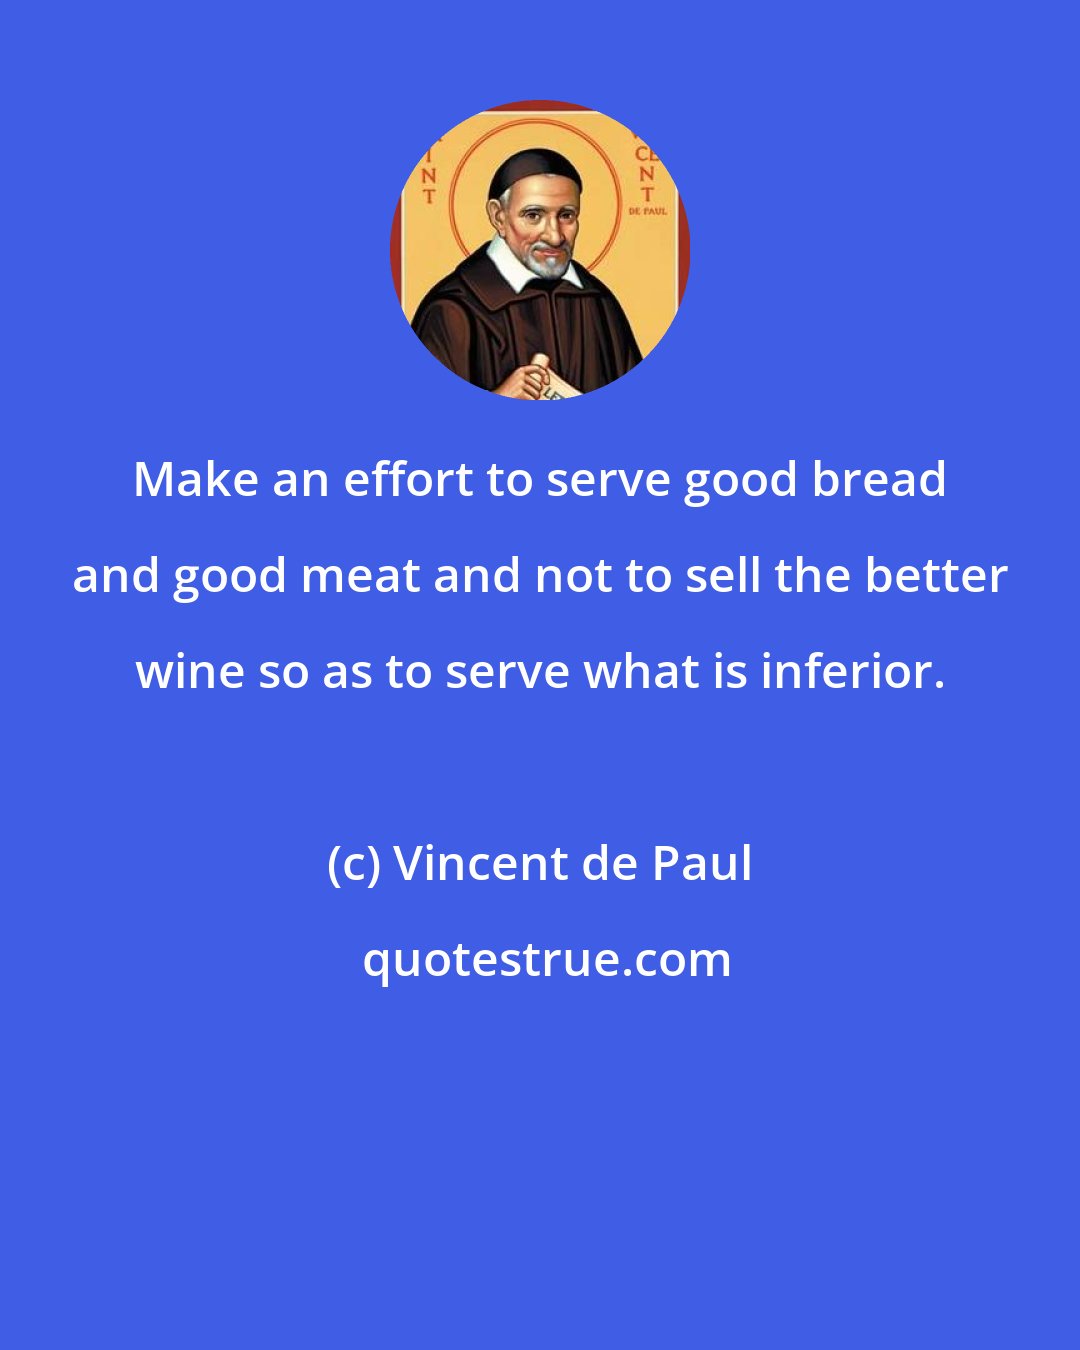 Vincent de Paul: Make an effort to serve good bread and good meat and not to sell the better wine so as to serve what is inferior.